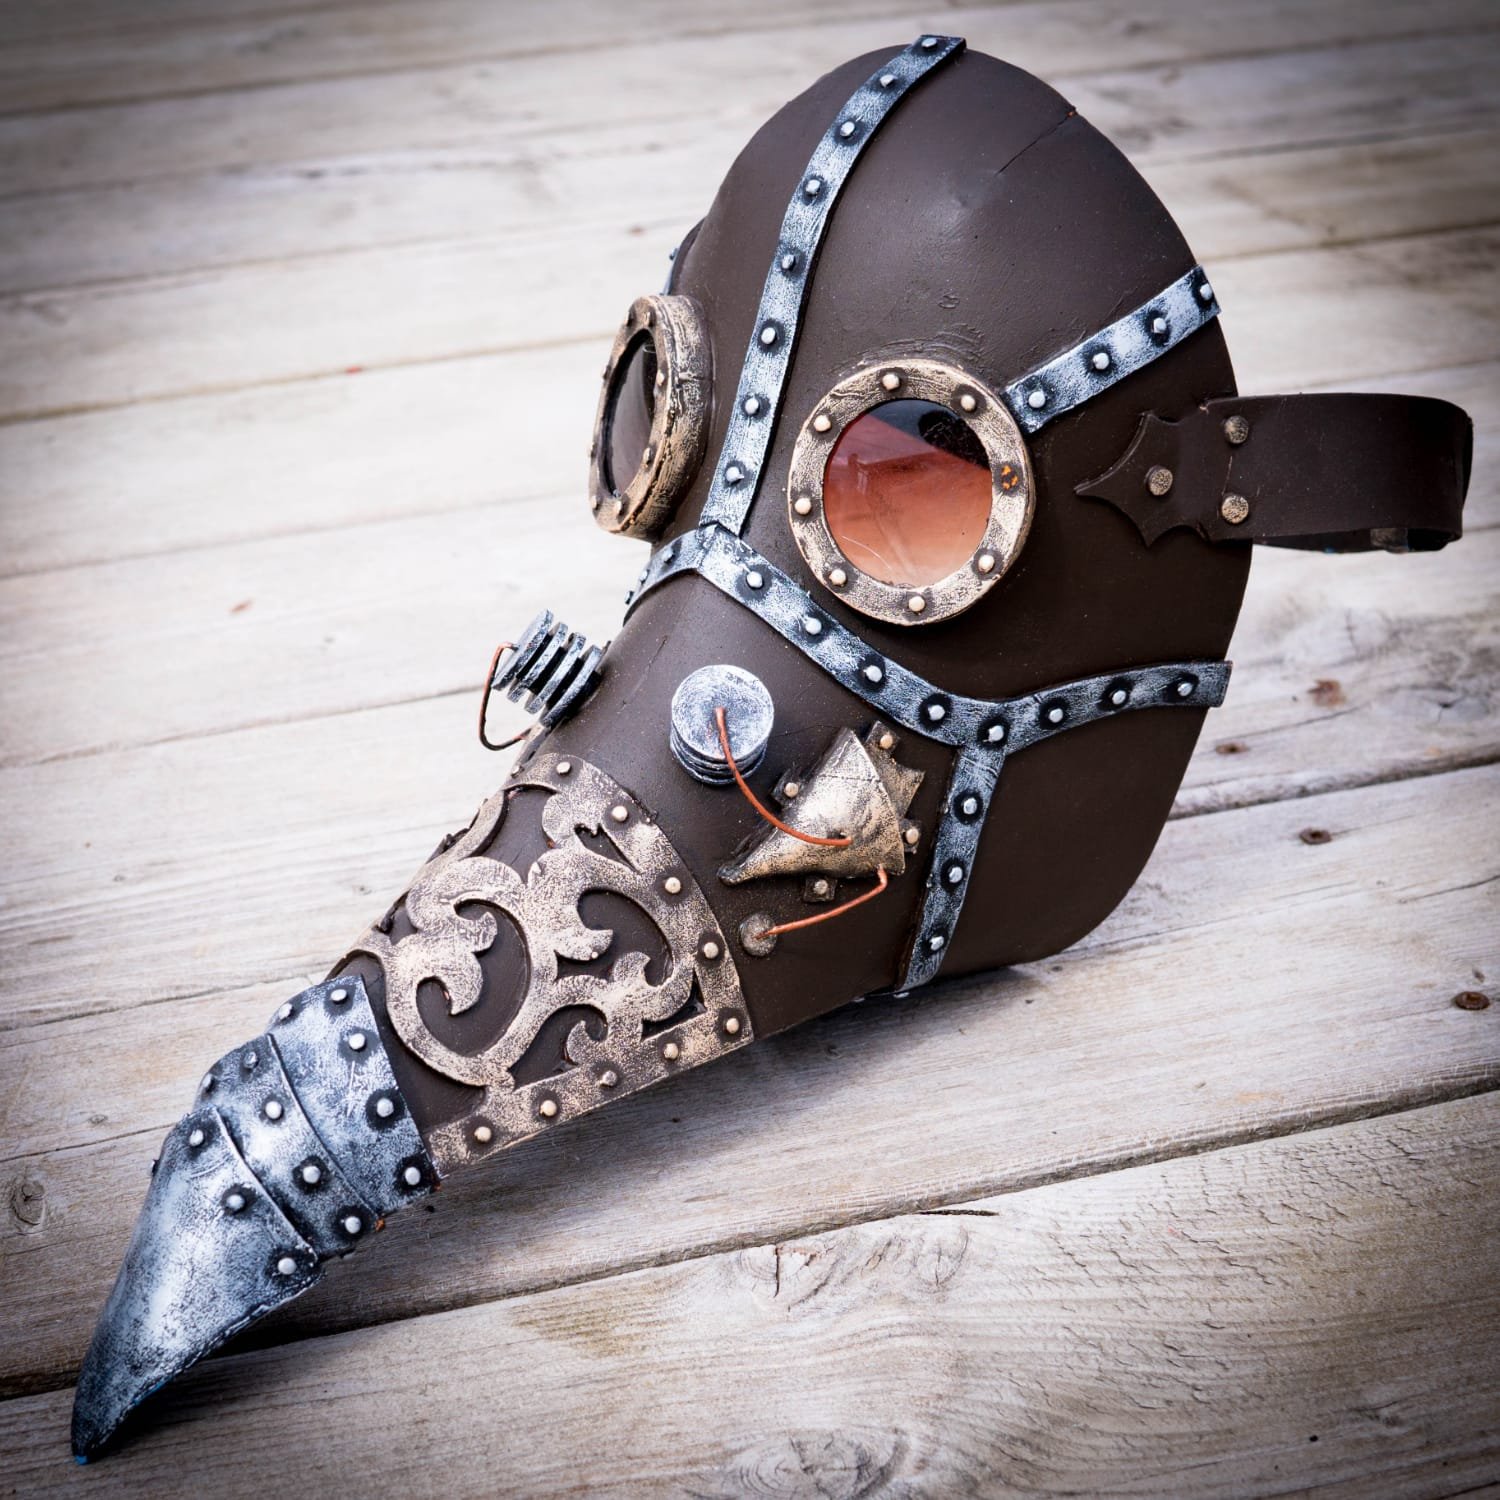 10 Amazing Steampunk Costume Ideas and accessories made from foam! — Lost  Wax